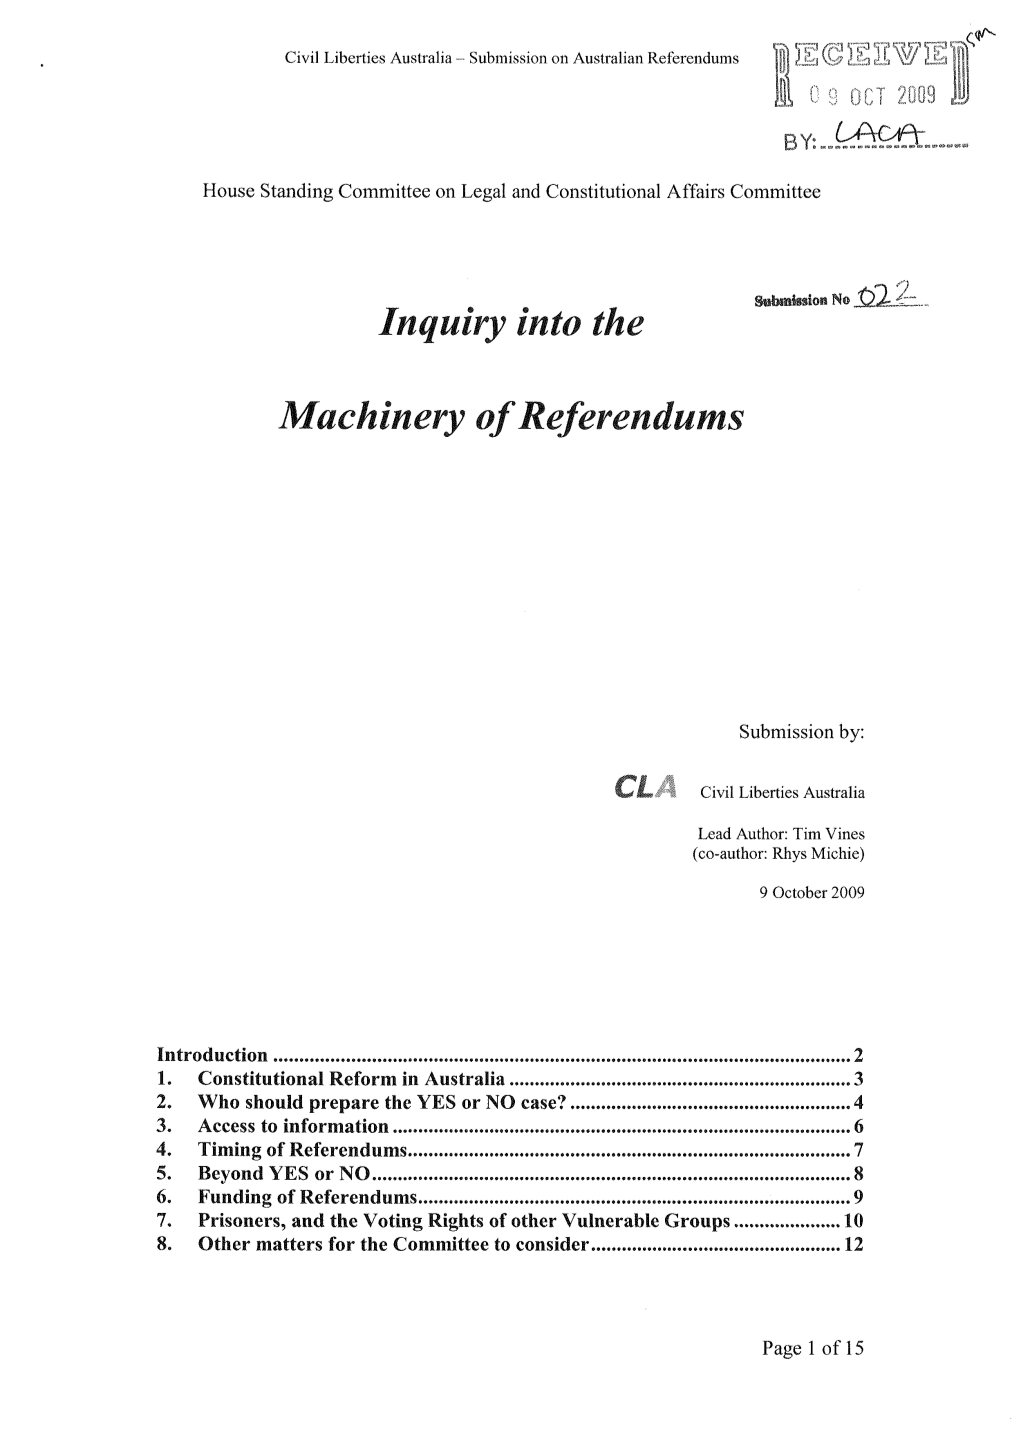 Inquiry Into the Machinery of Referendums